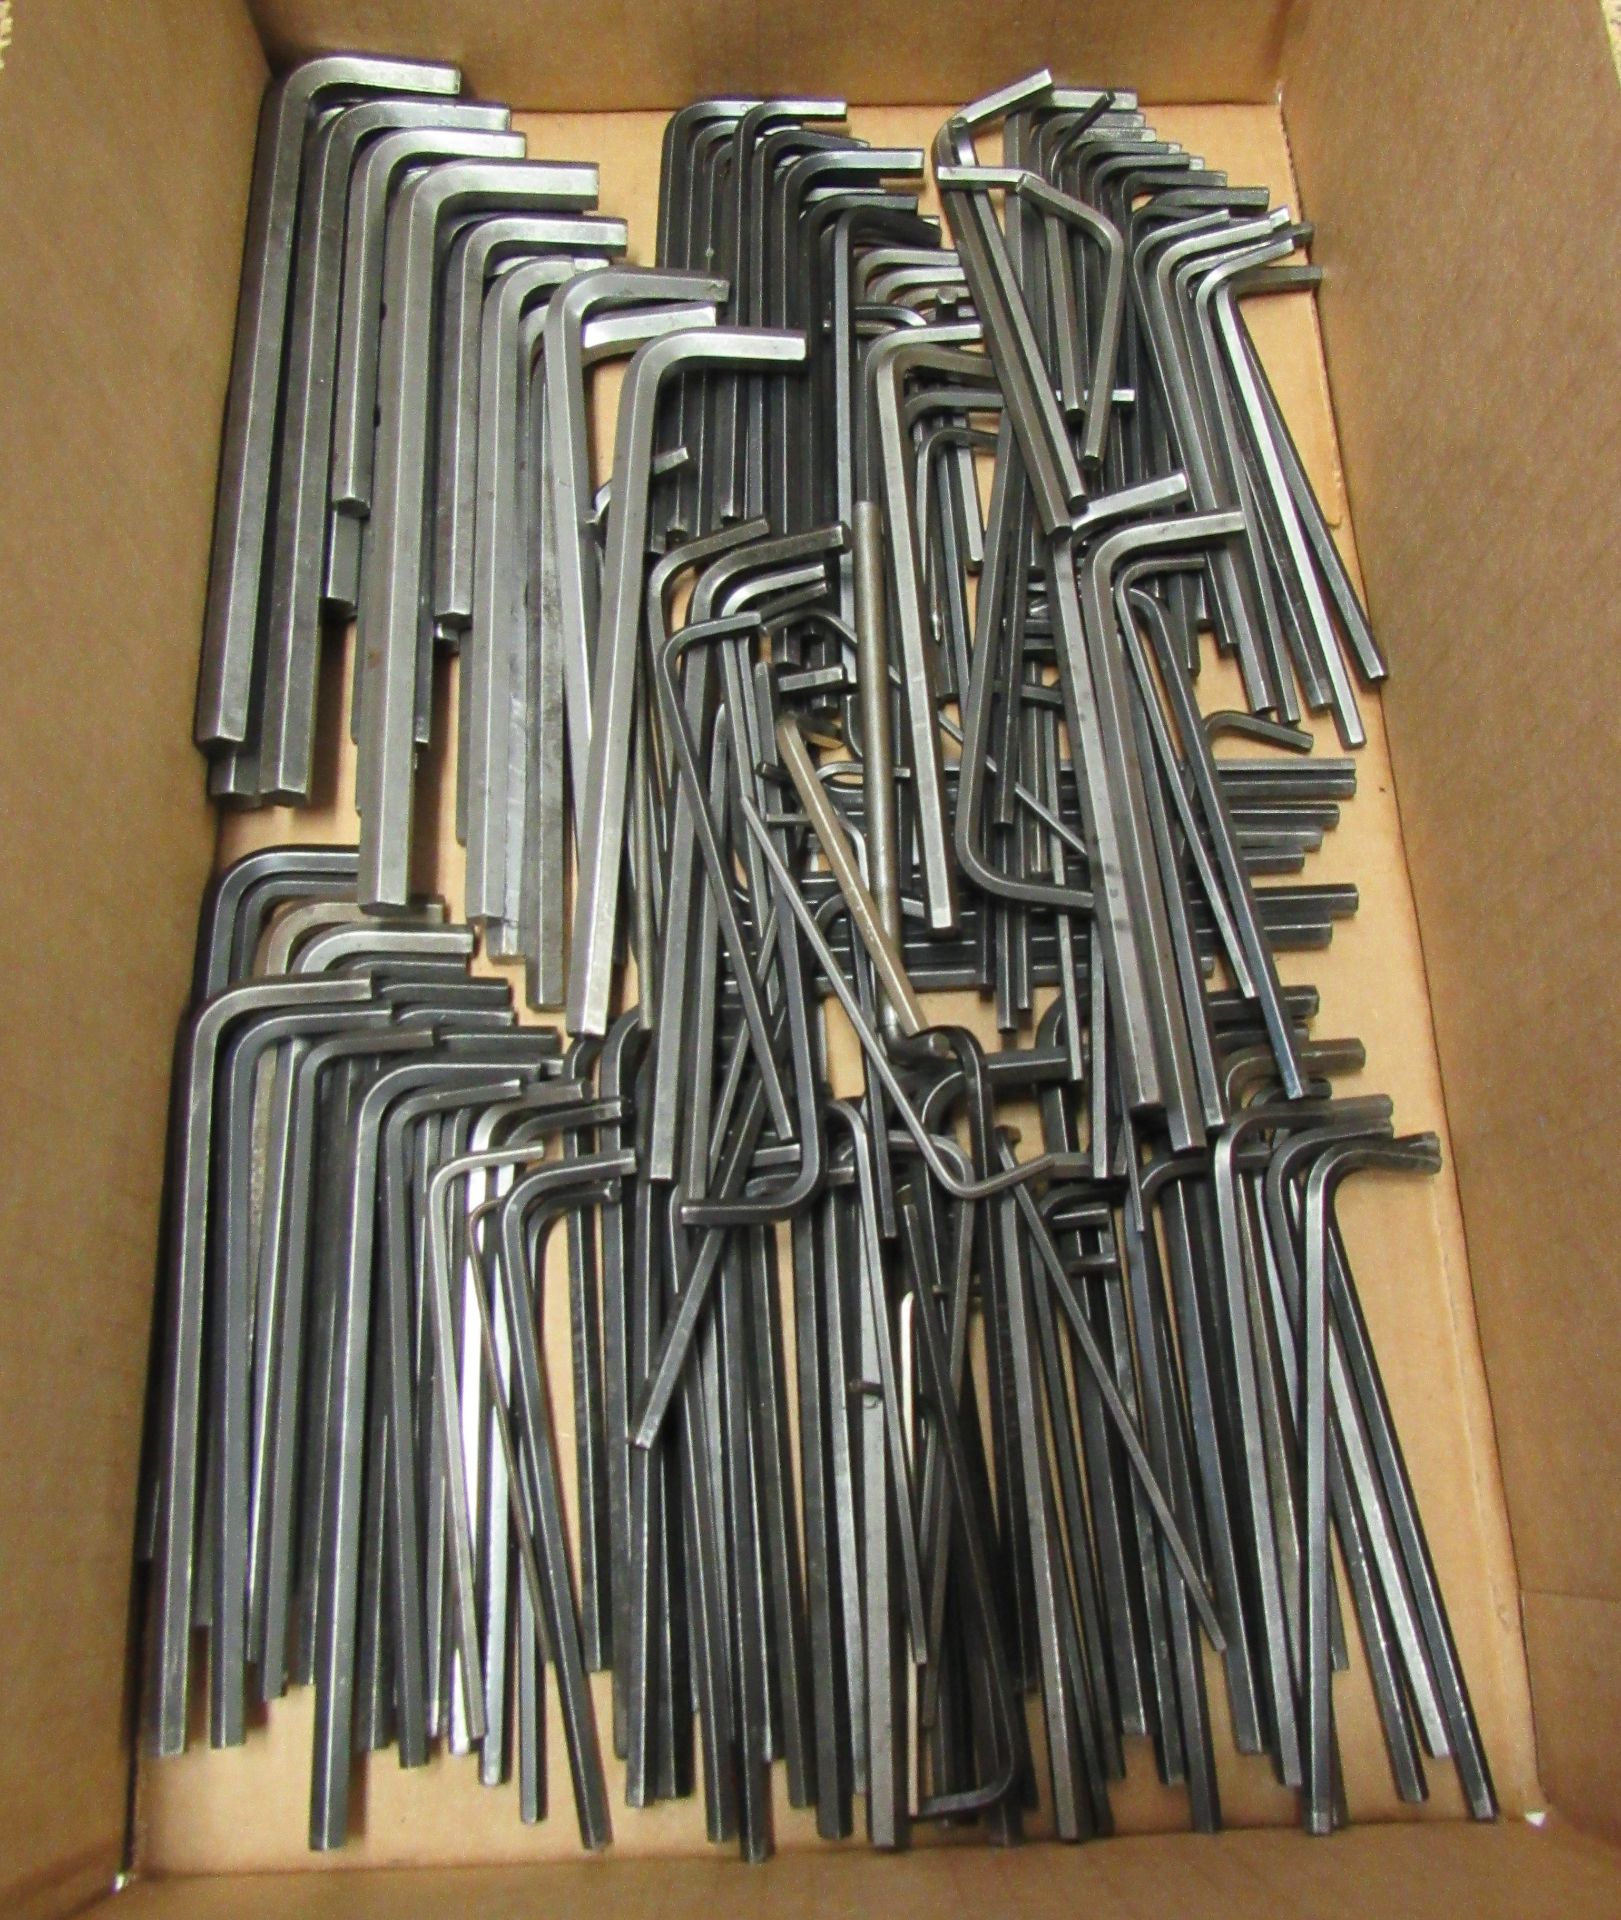 Lot Approx. 180 Allen Wrenches